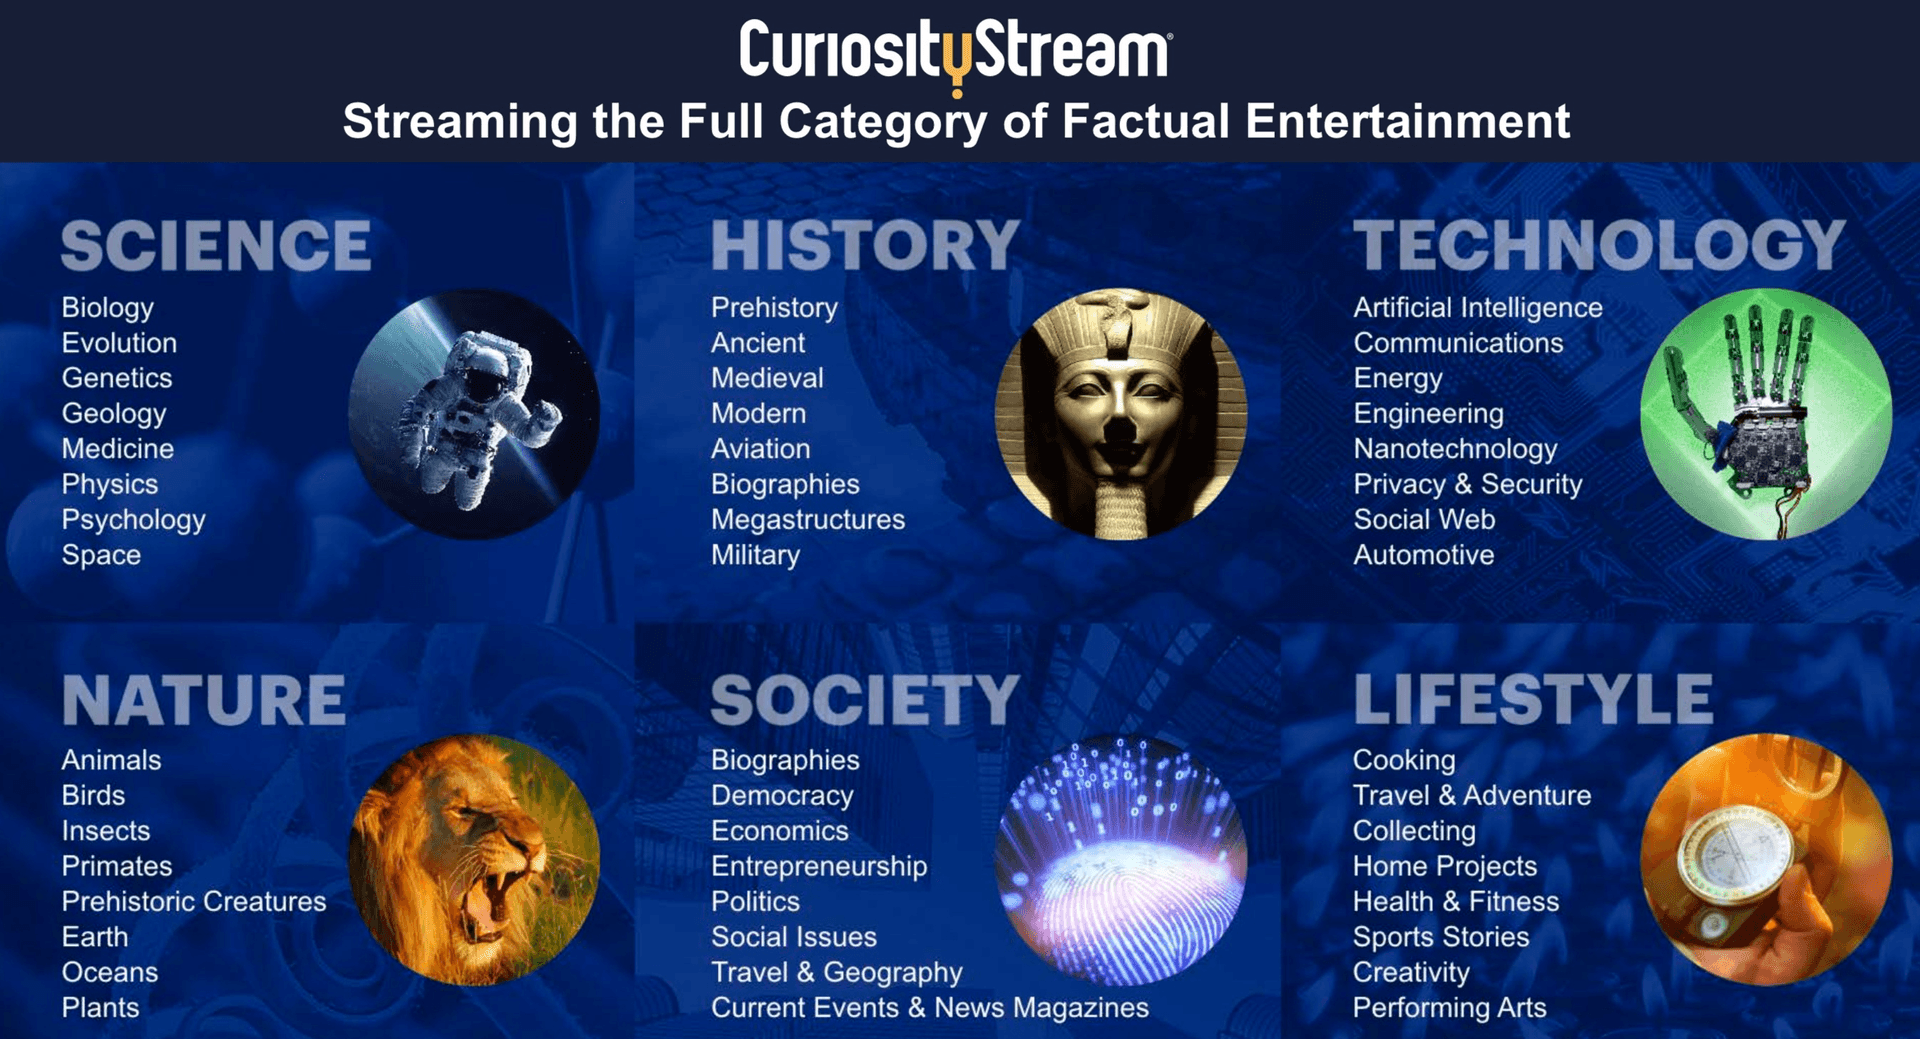 Watch curiositystream and all its amazing content, with documentary programs in multiple categories including society, lifestyle, nature, history, technology and science. 